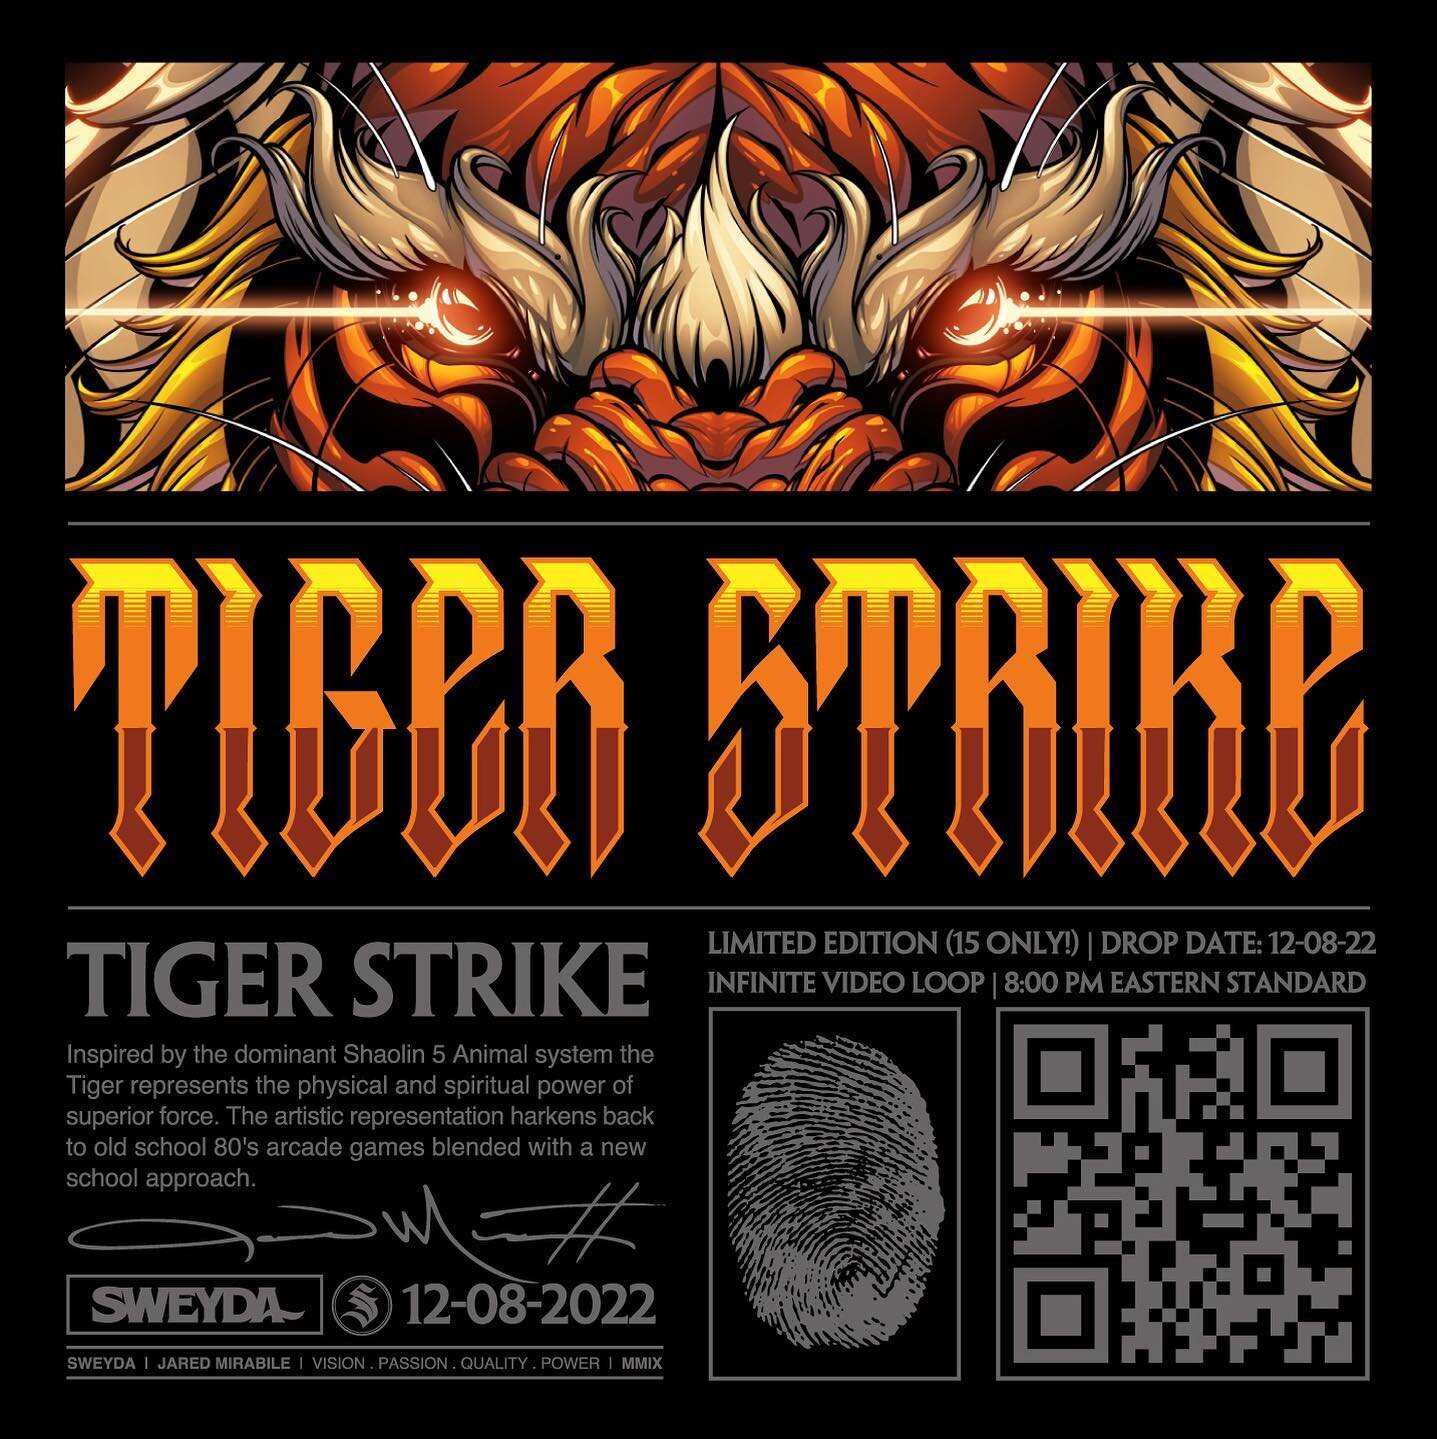 HERE WE GOOOOO! 
Limited edition (only 15 available) Tiger Strike infinite video loop. Will go live on 12-08-2022 (this Thursday) at 8:00 eastern standard time. Each will have a hand sign certificate of authenticity.